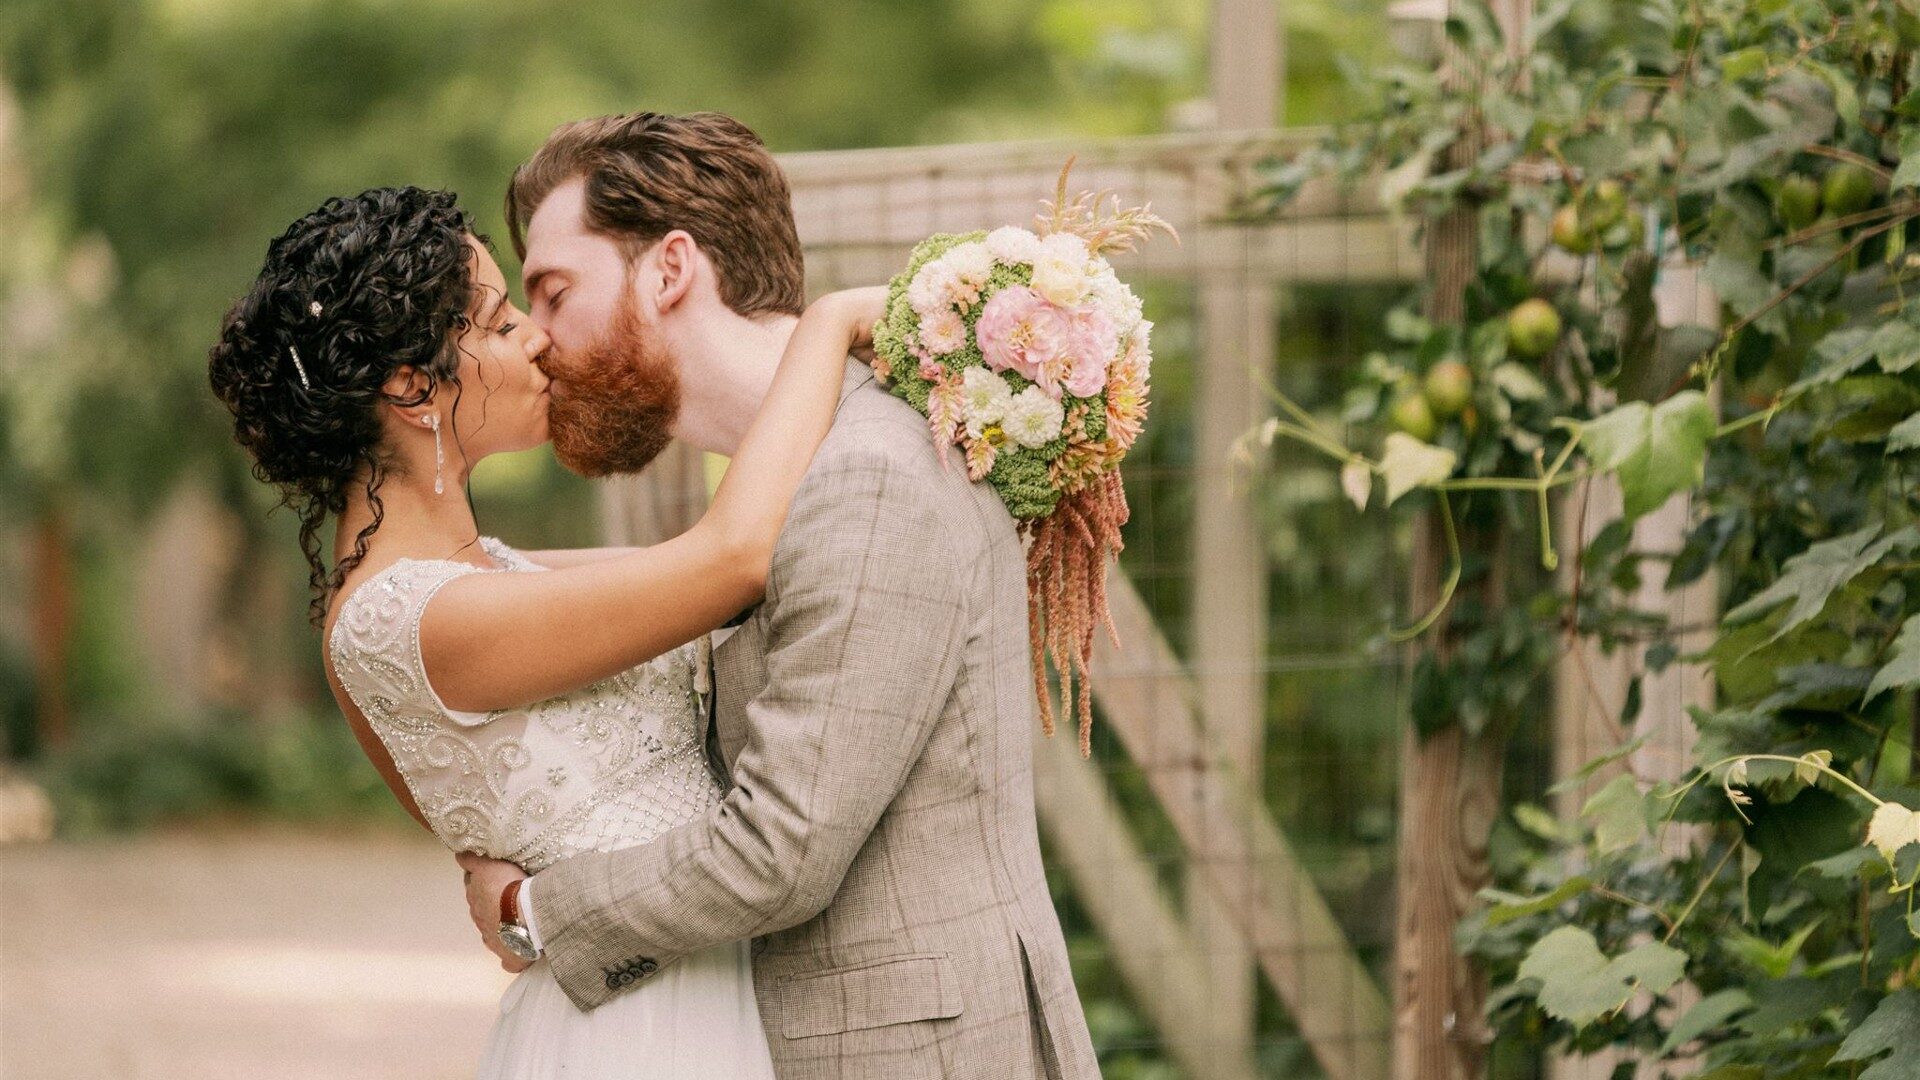 A bride and groom kissing in an outdoor garden